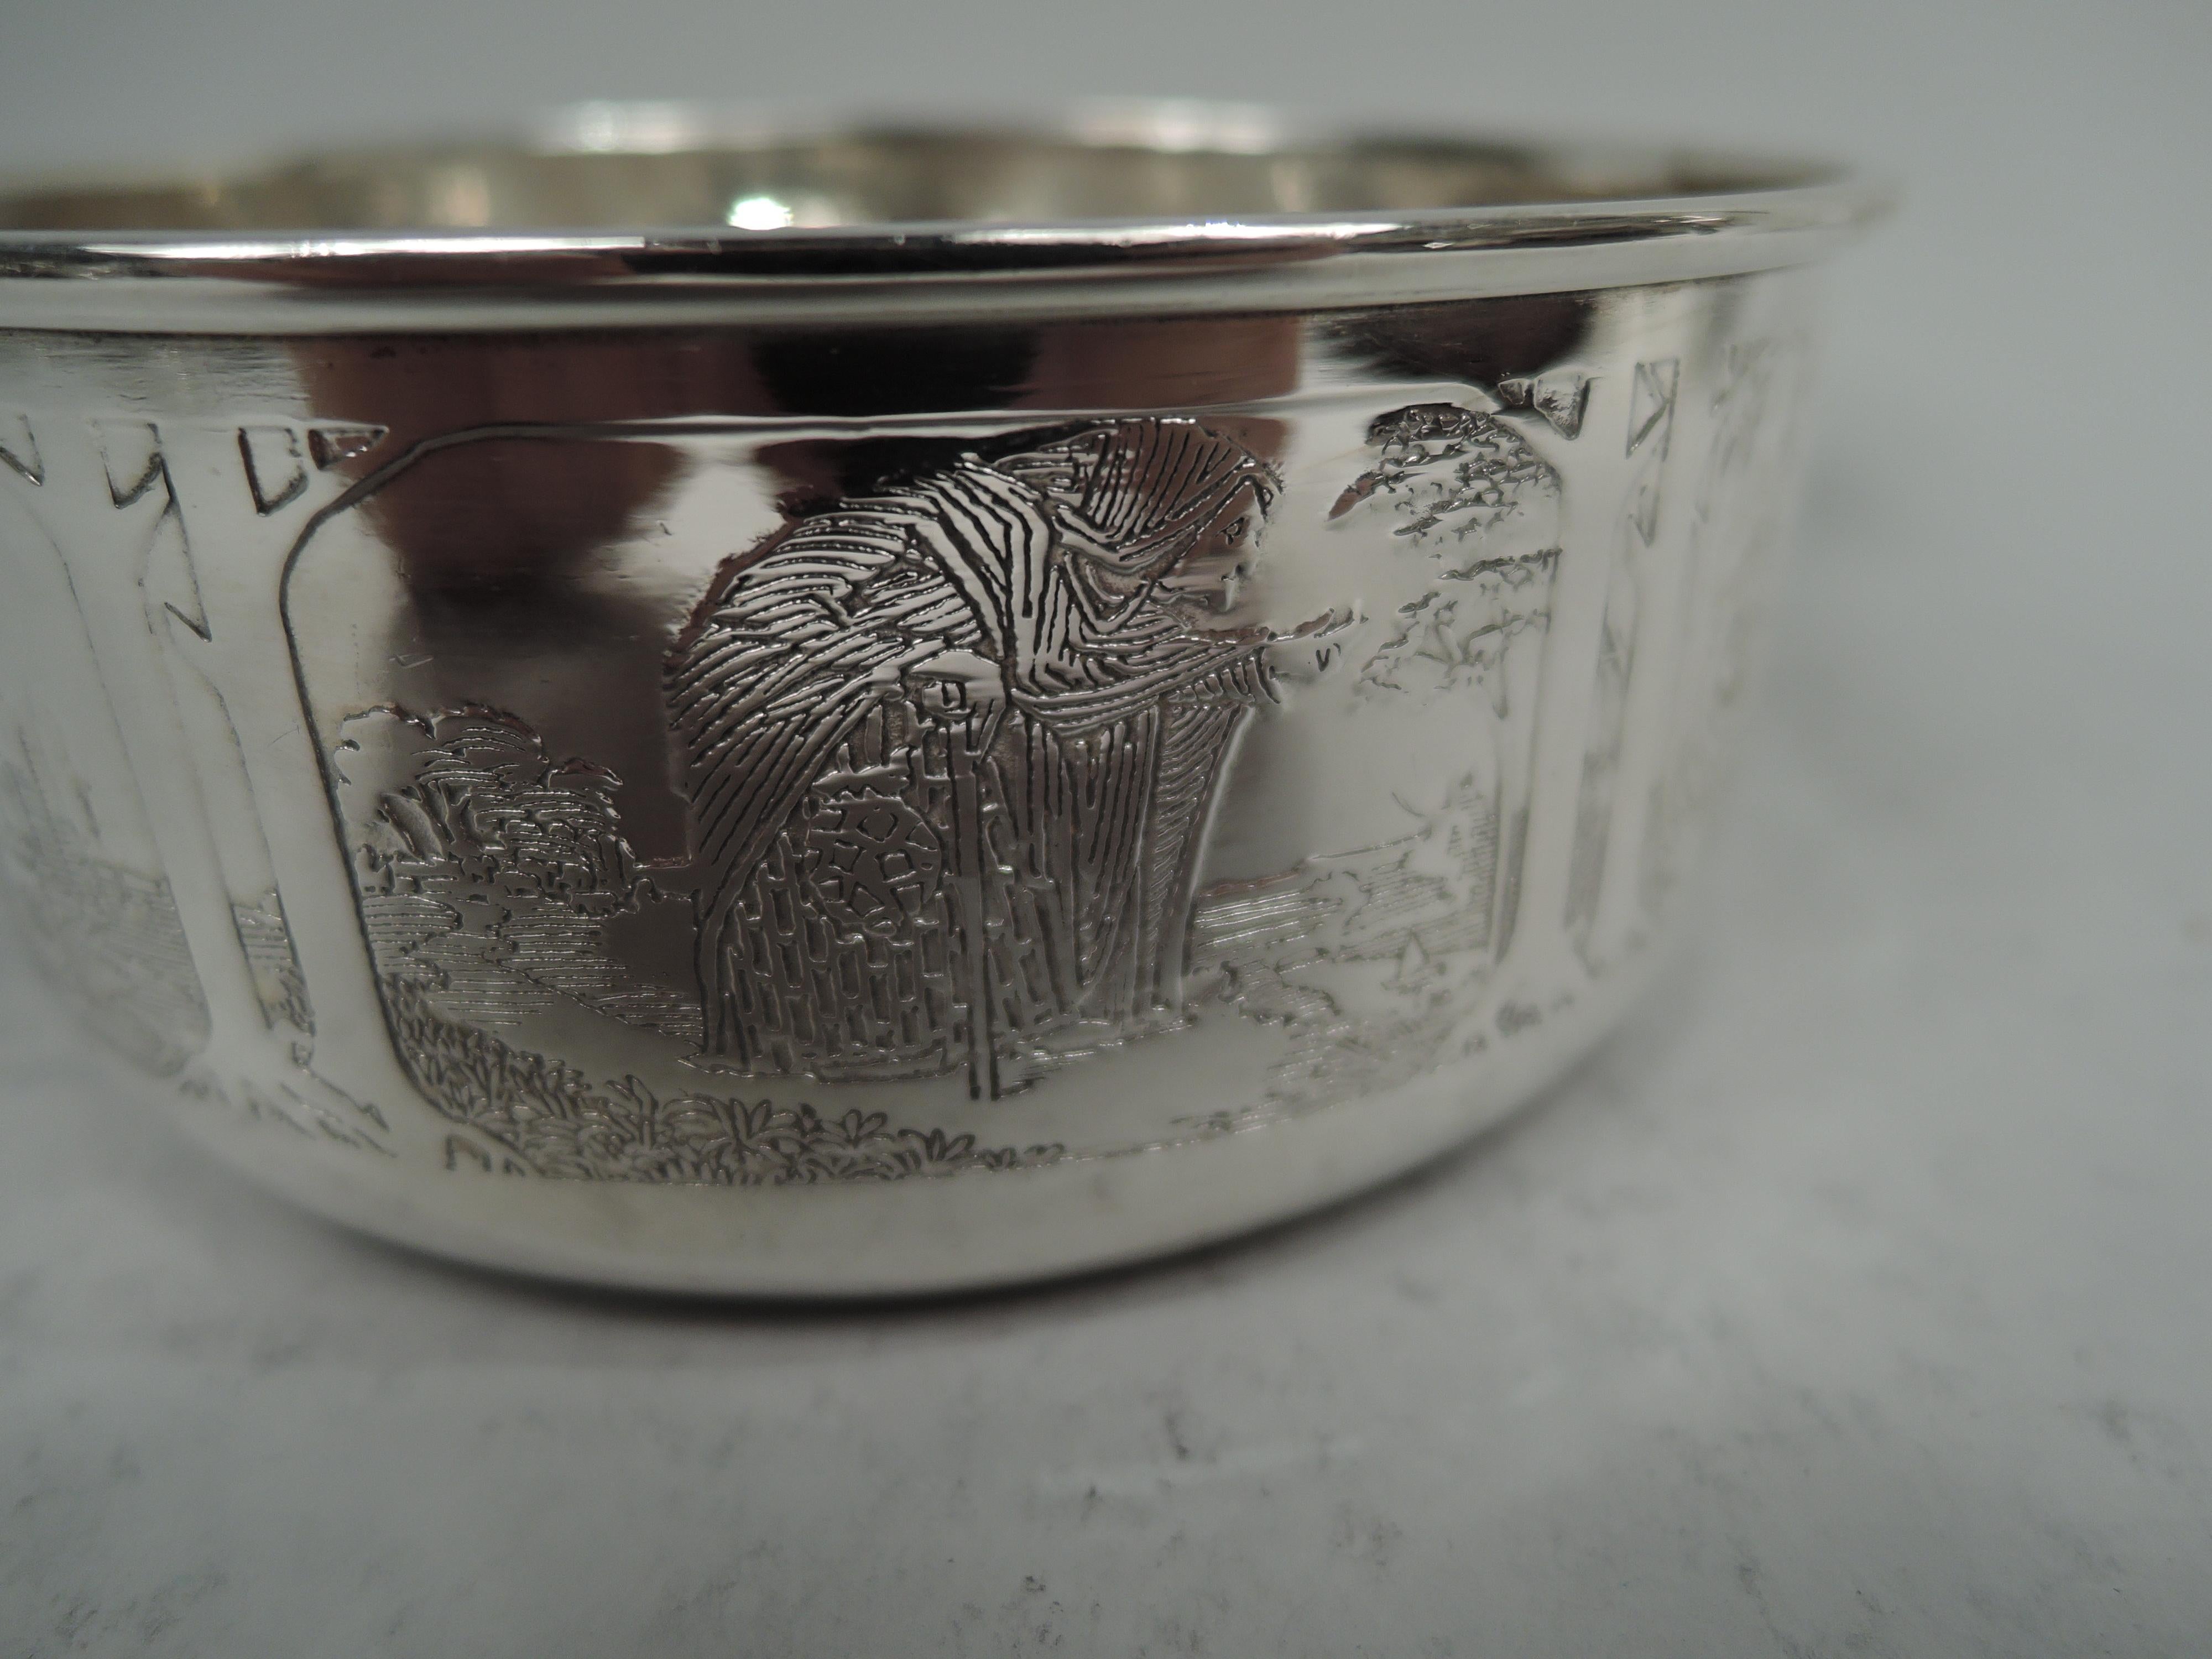 Edwardian Art Nouveau sterling silver porringer. Made by William B. Kerr & Co. in Newark, ca 1910. Round with straight sides shaped solid handle. On exterior are acid-etched fairytale scenes depicting beguiling maidens, stooped crones, and credulous